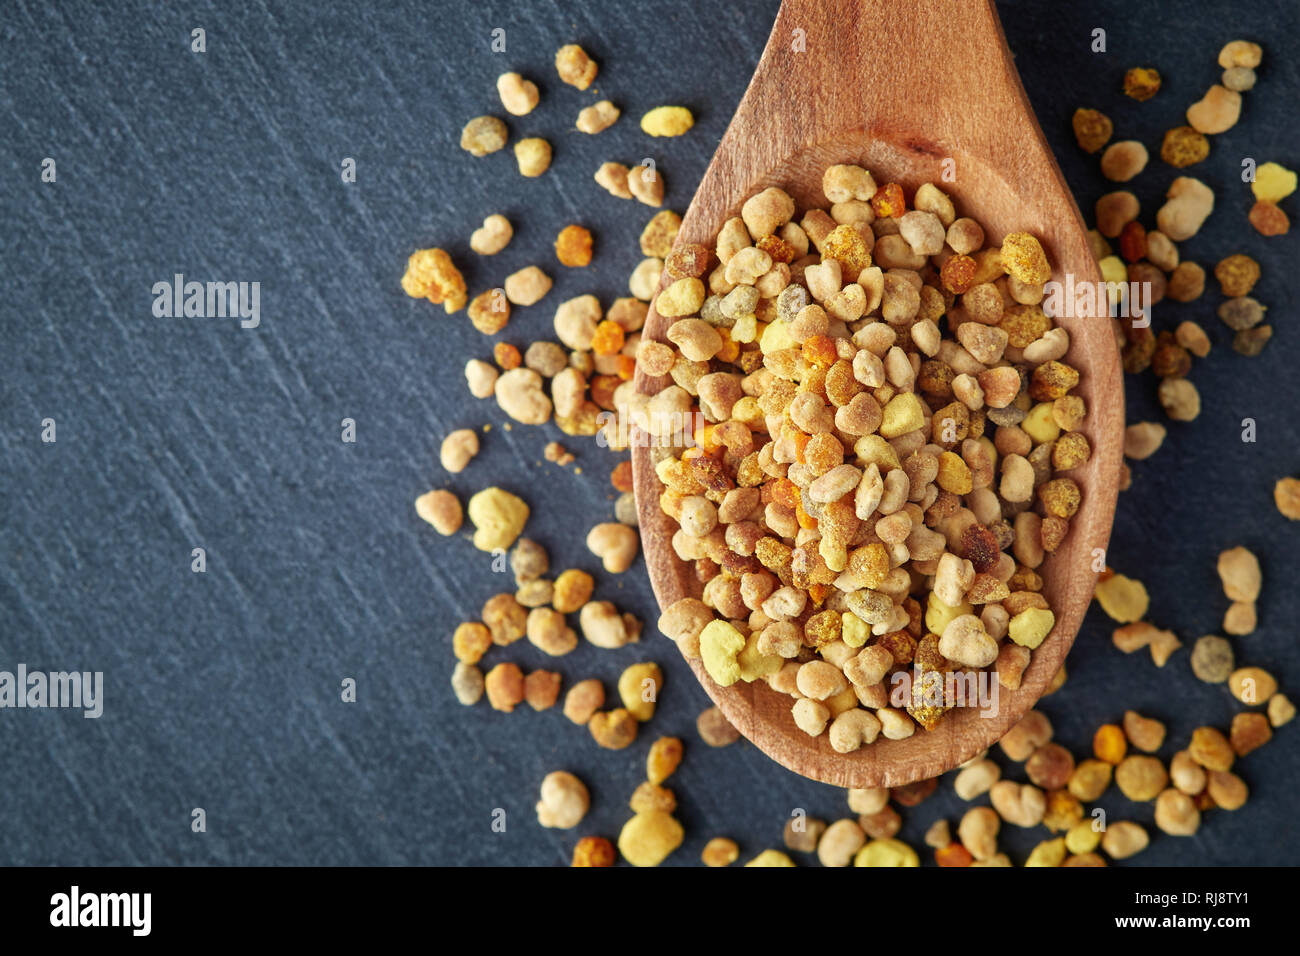 Bee pollen grains in wooden spoon. Top view with copy space Stock Photo